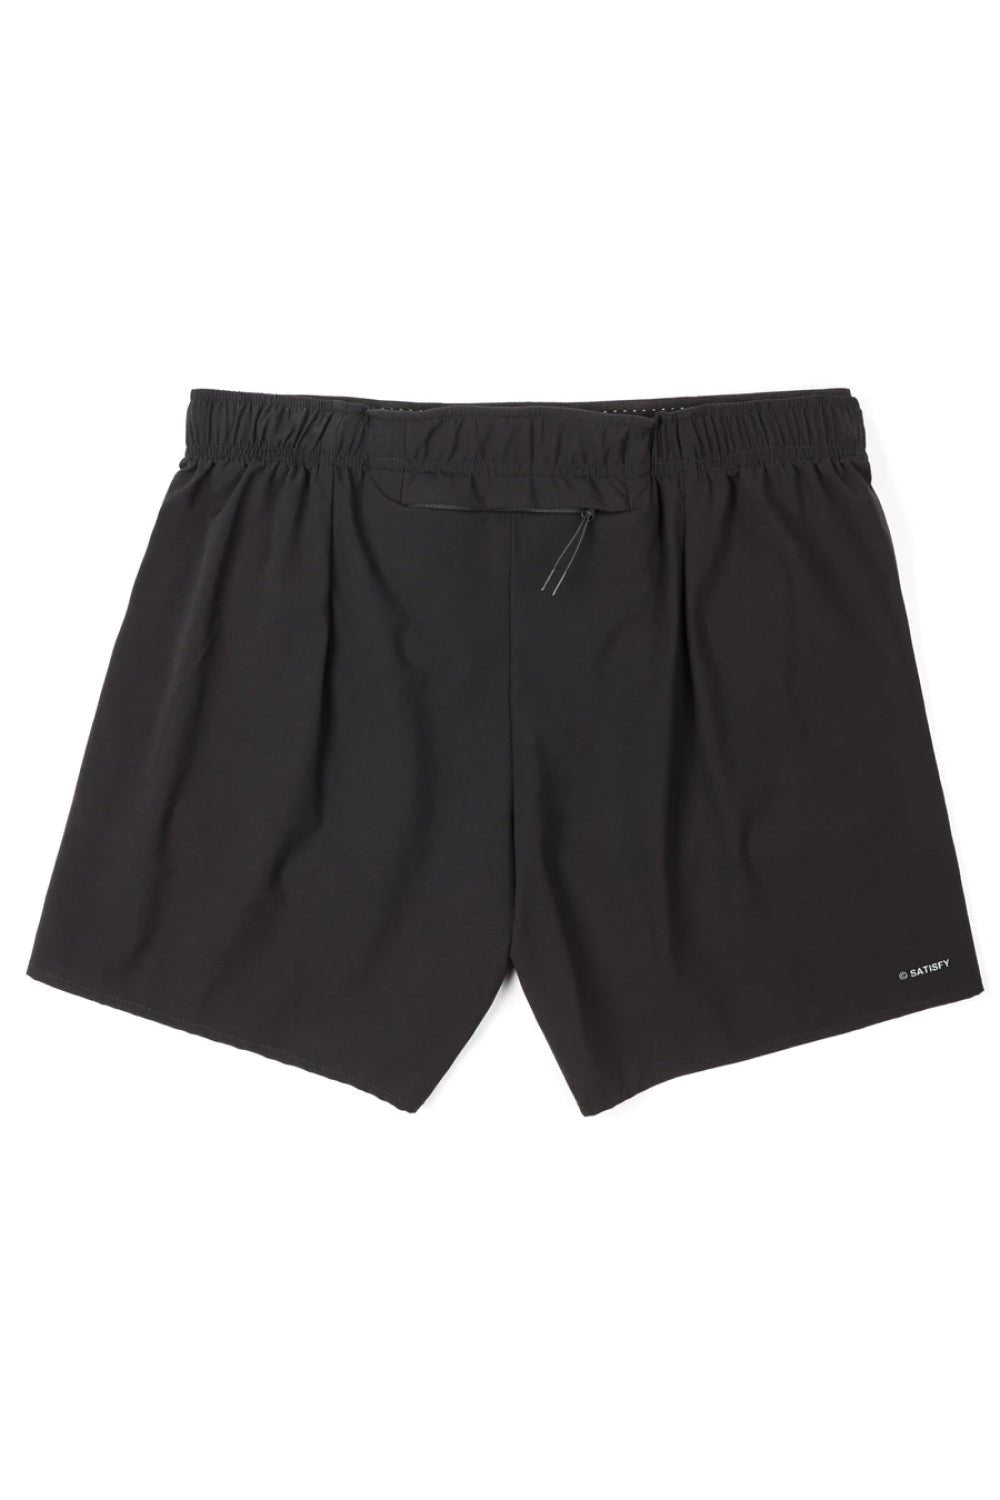 Satisfy Justice™ 5" Unlined Shorts - Black | Coffee Outdoors